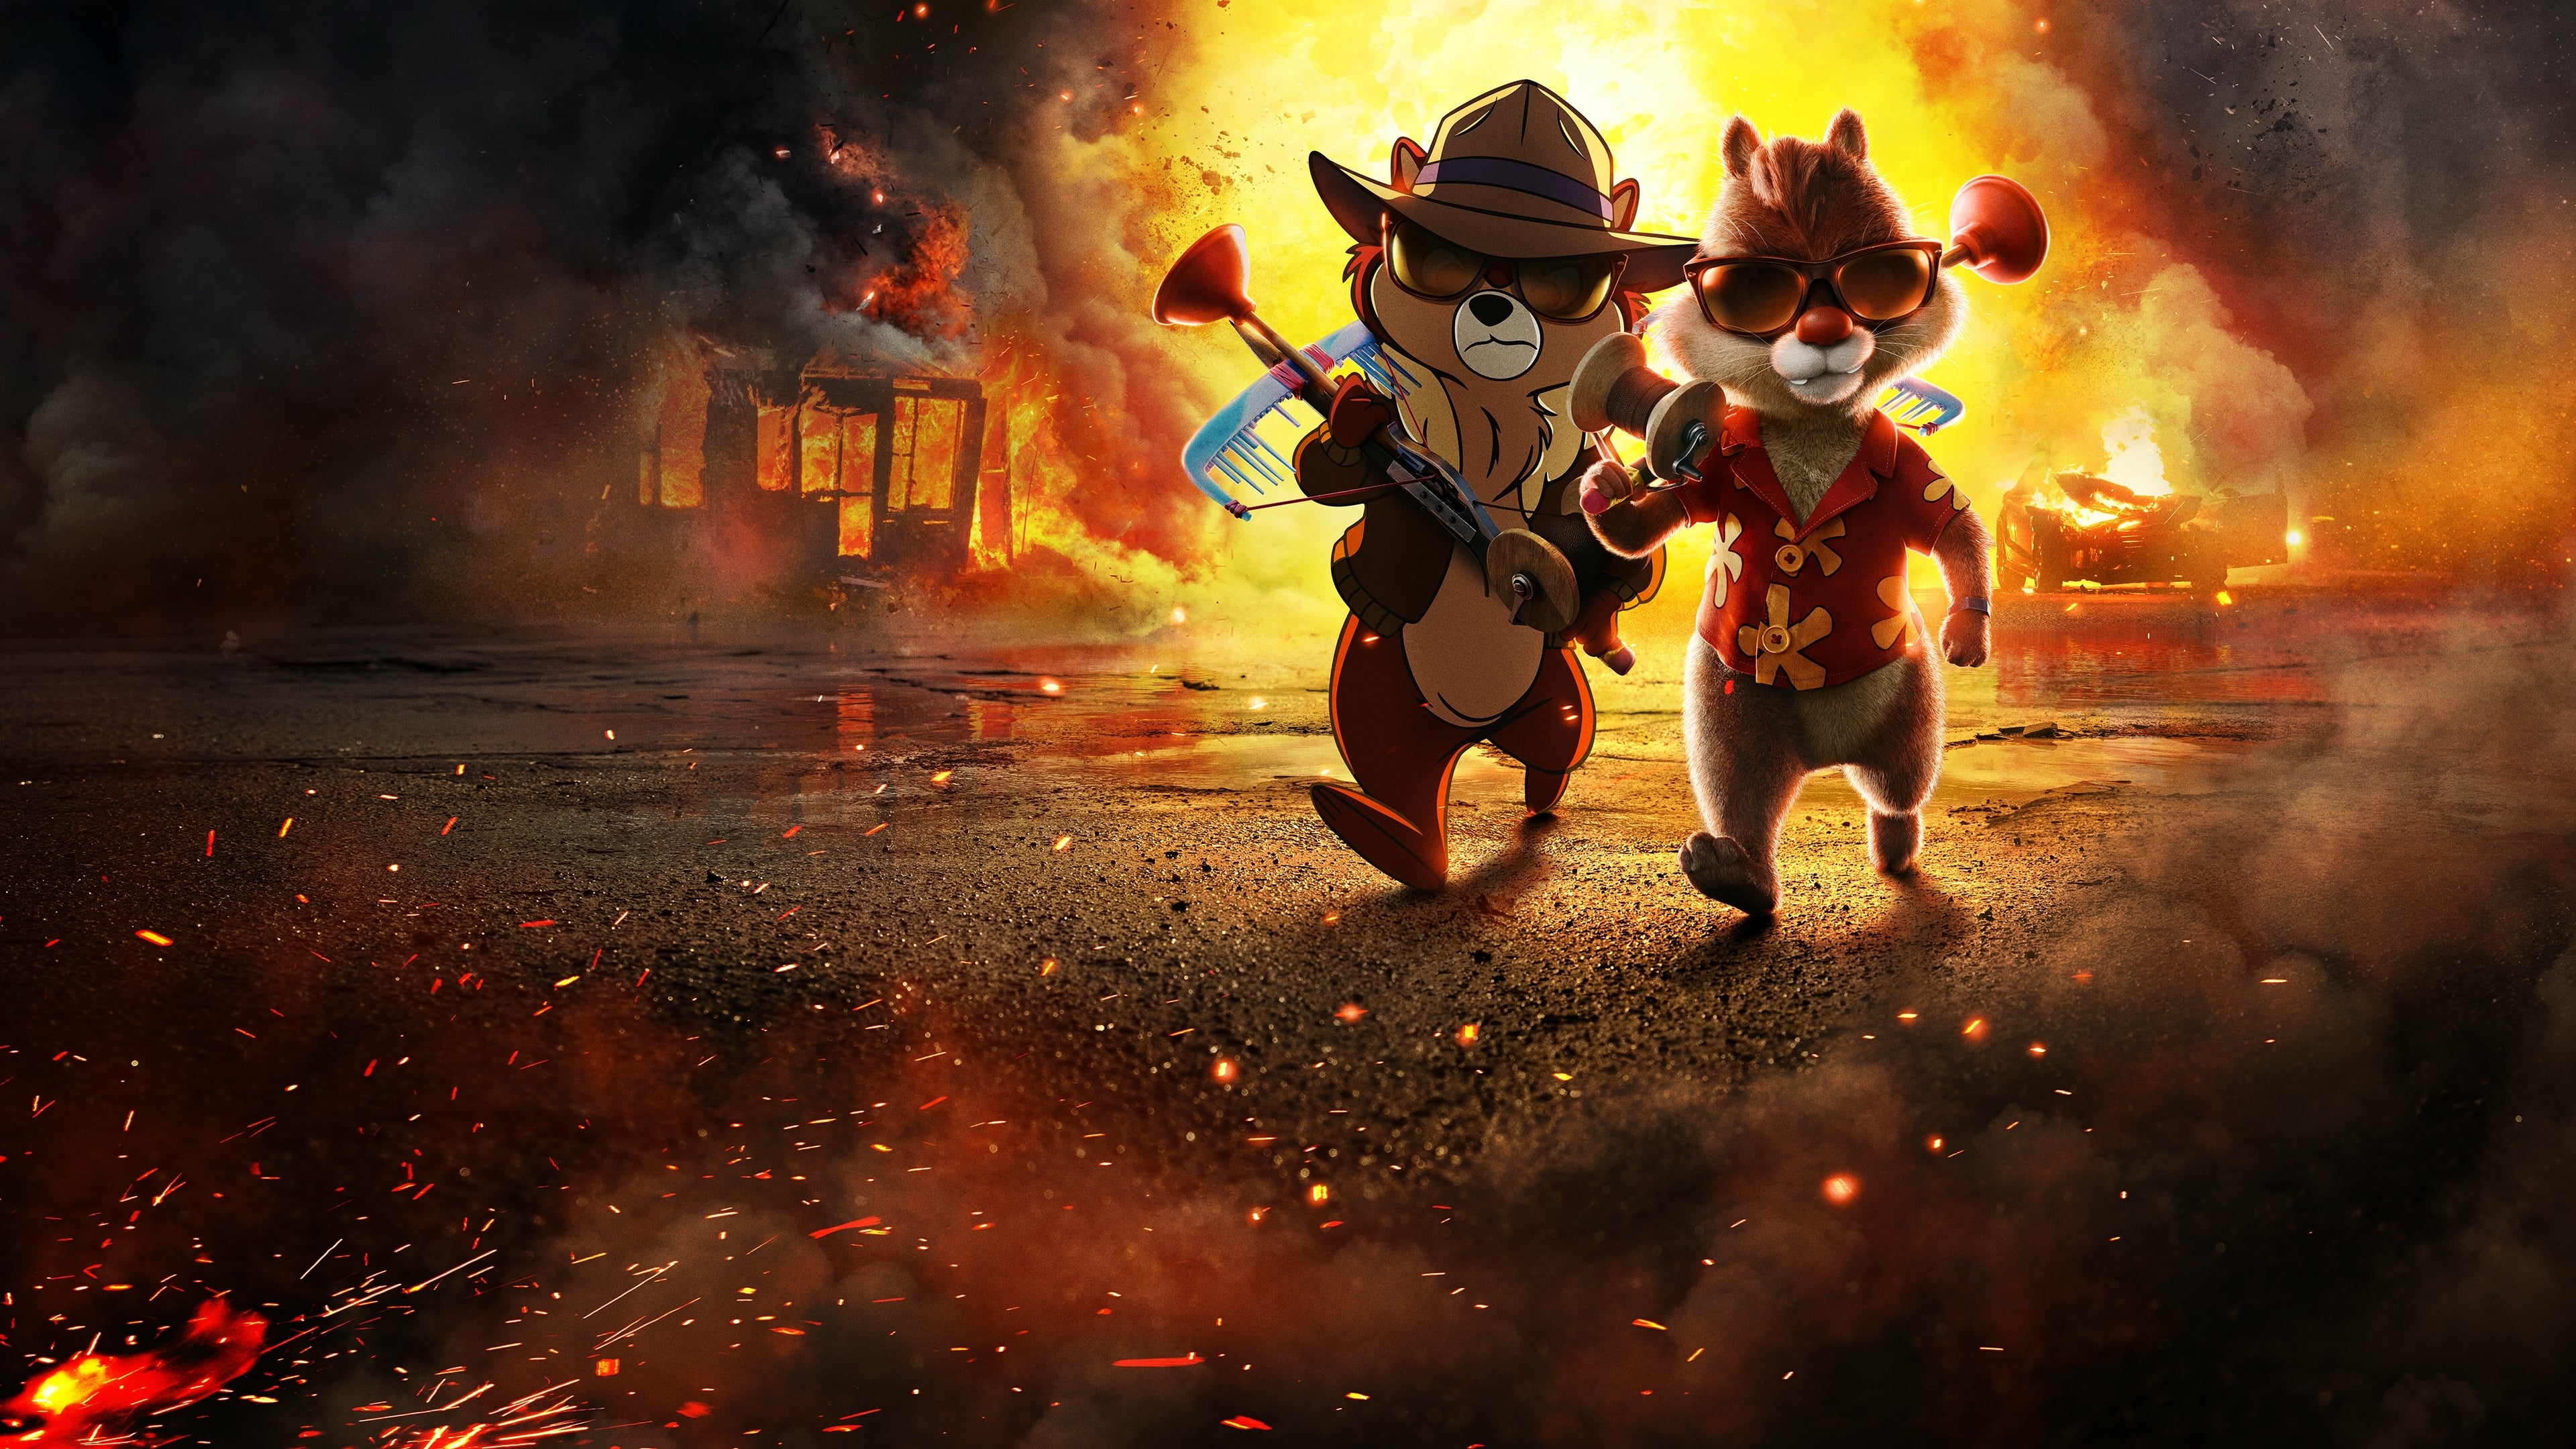 Disney Chip 'n Dale Rescue Rangers 2022 Wallpaper, HD Movies 4K Wallpapers,  Images, Photos and Background - Wallpapers Den